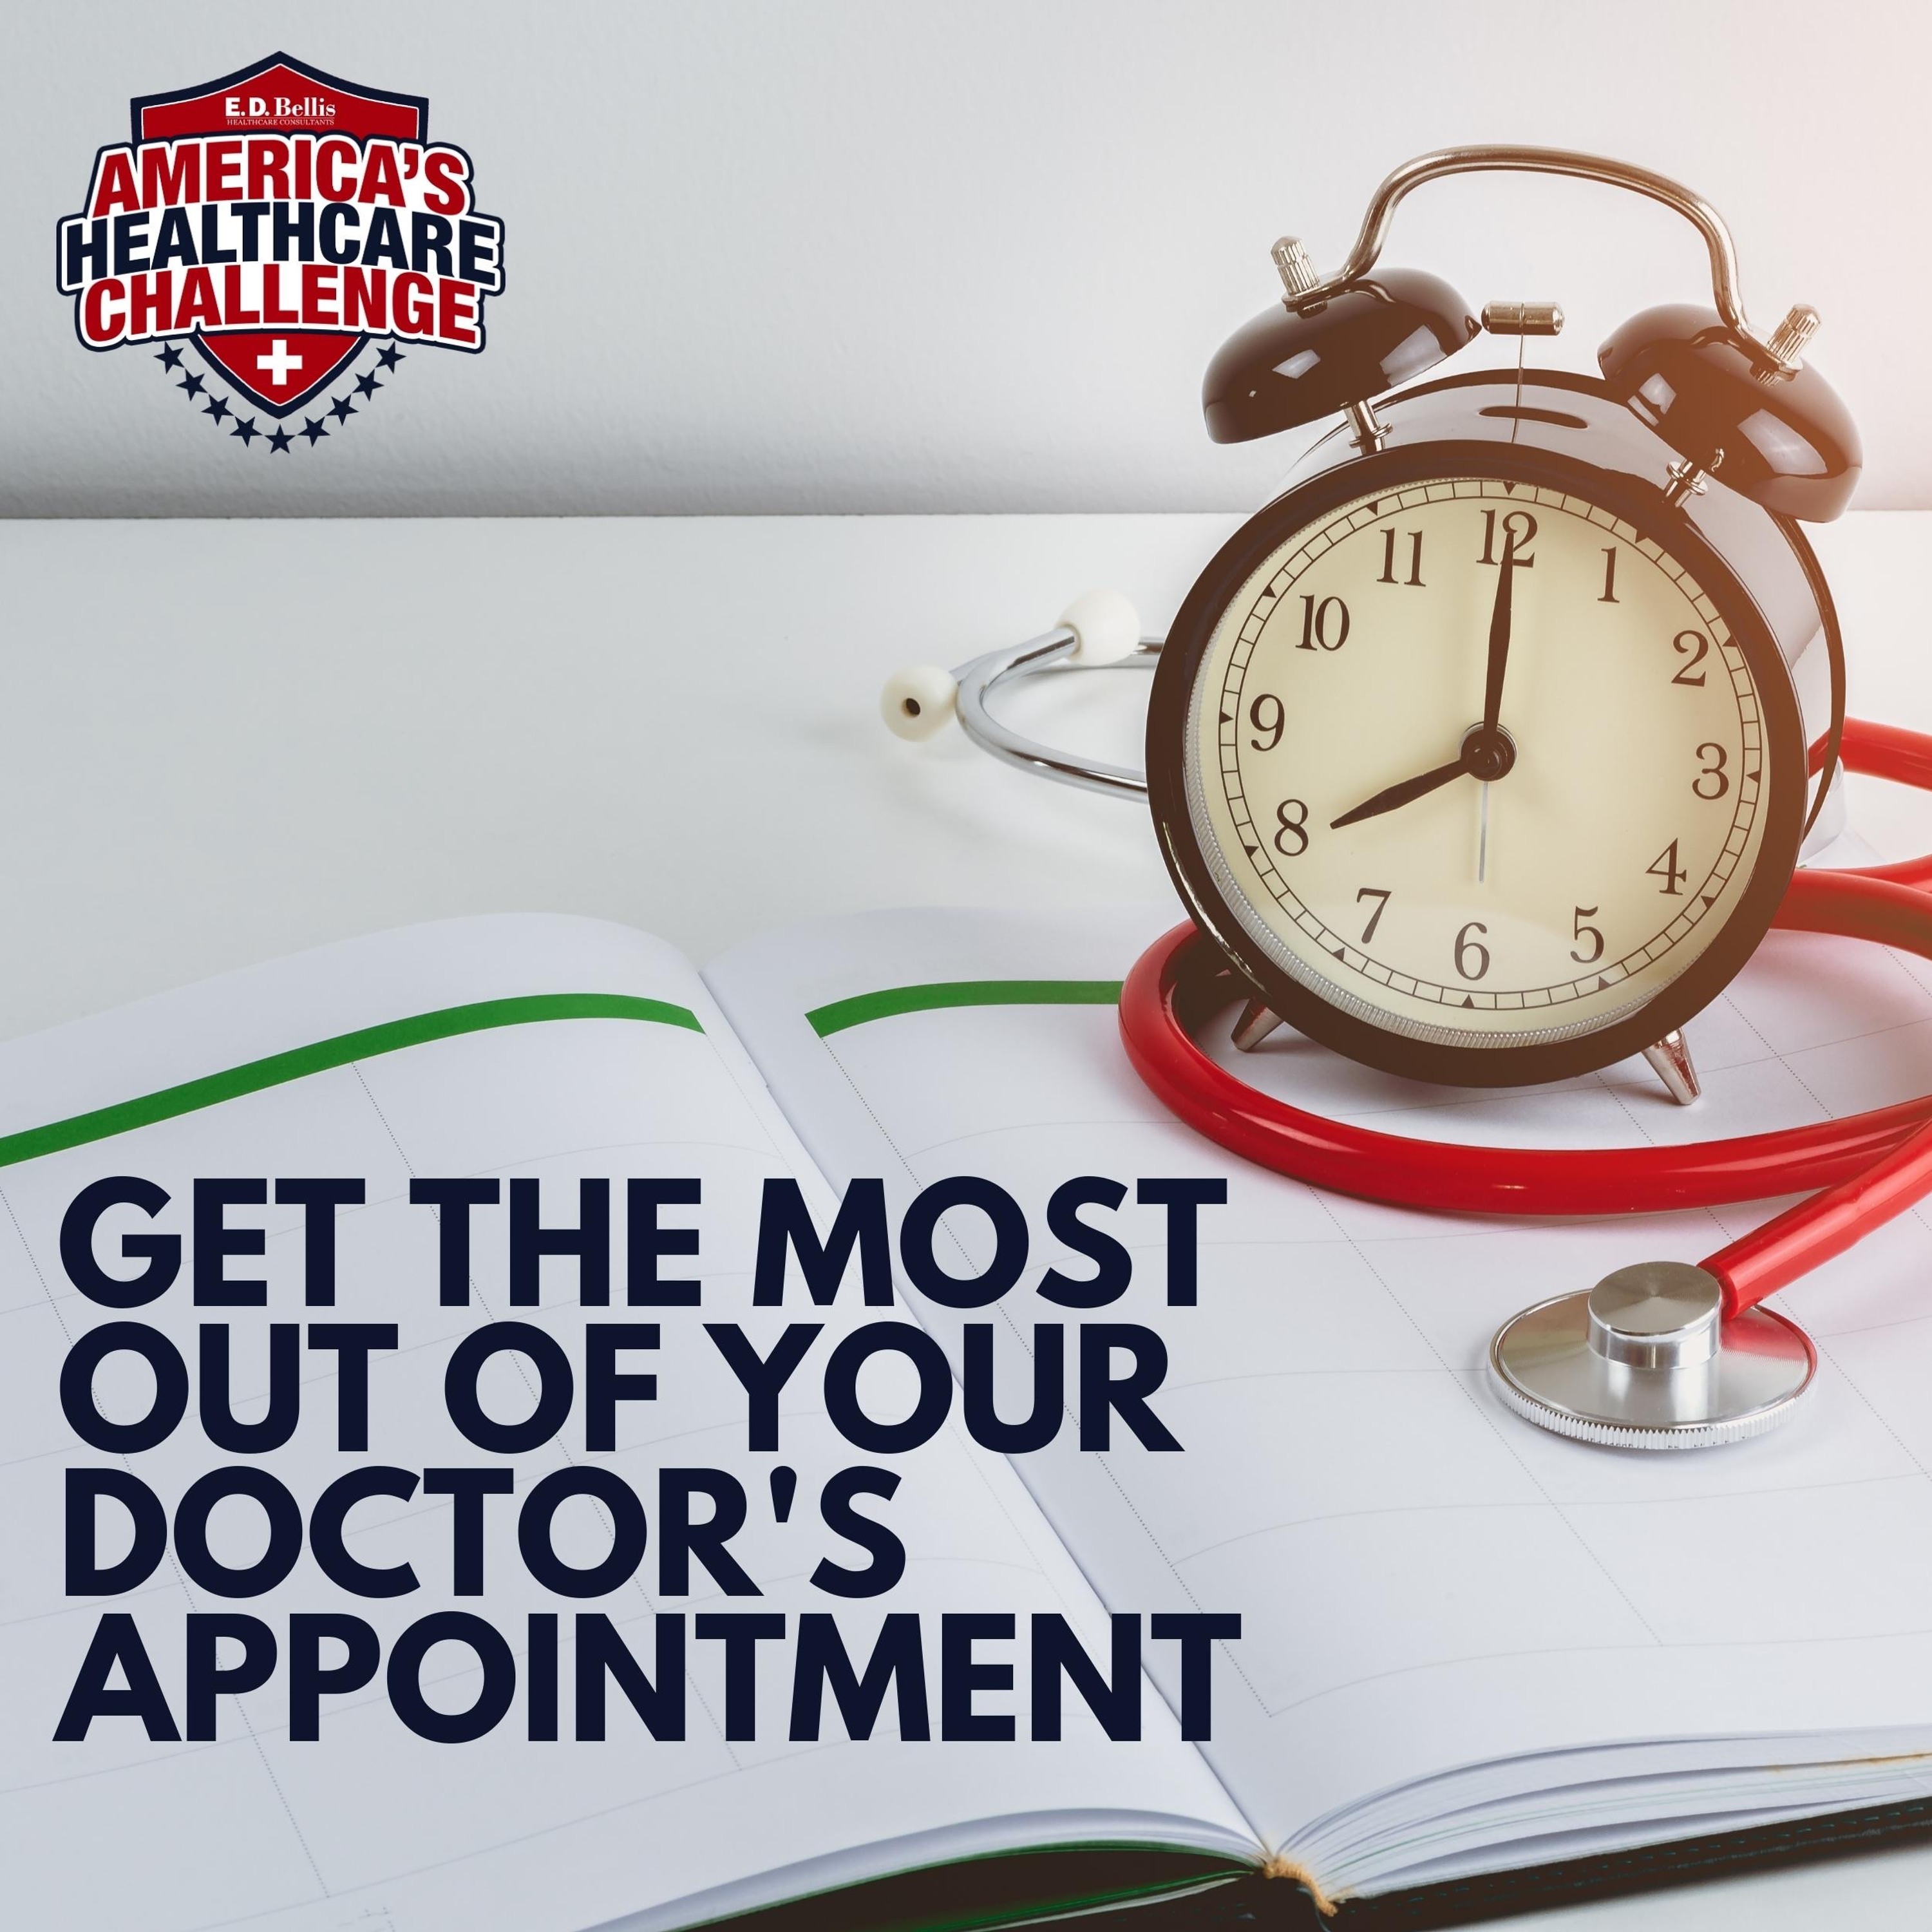 How You Can Get the Most Out of Your Doctor's Appointment